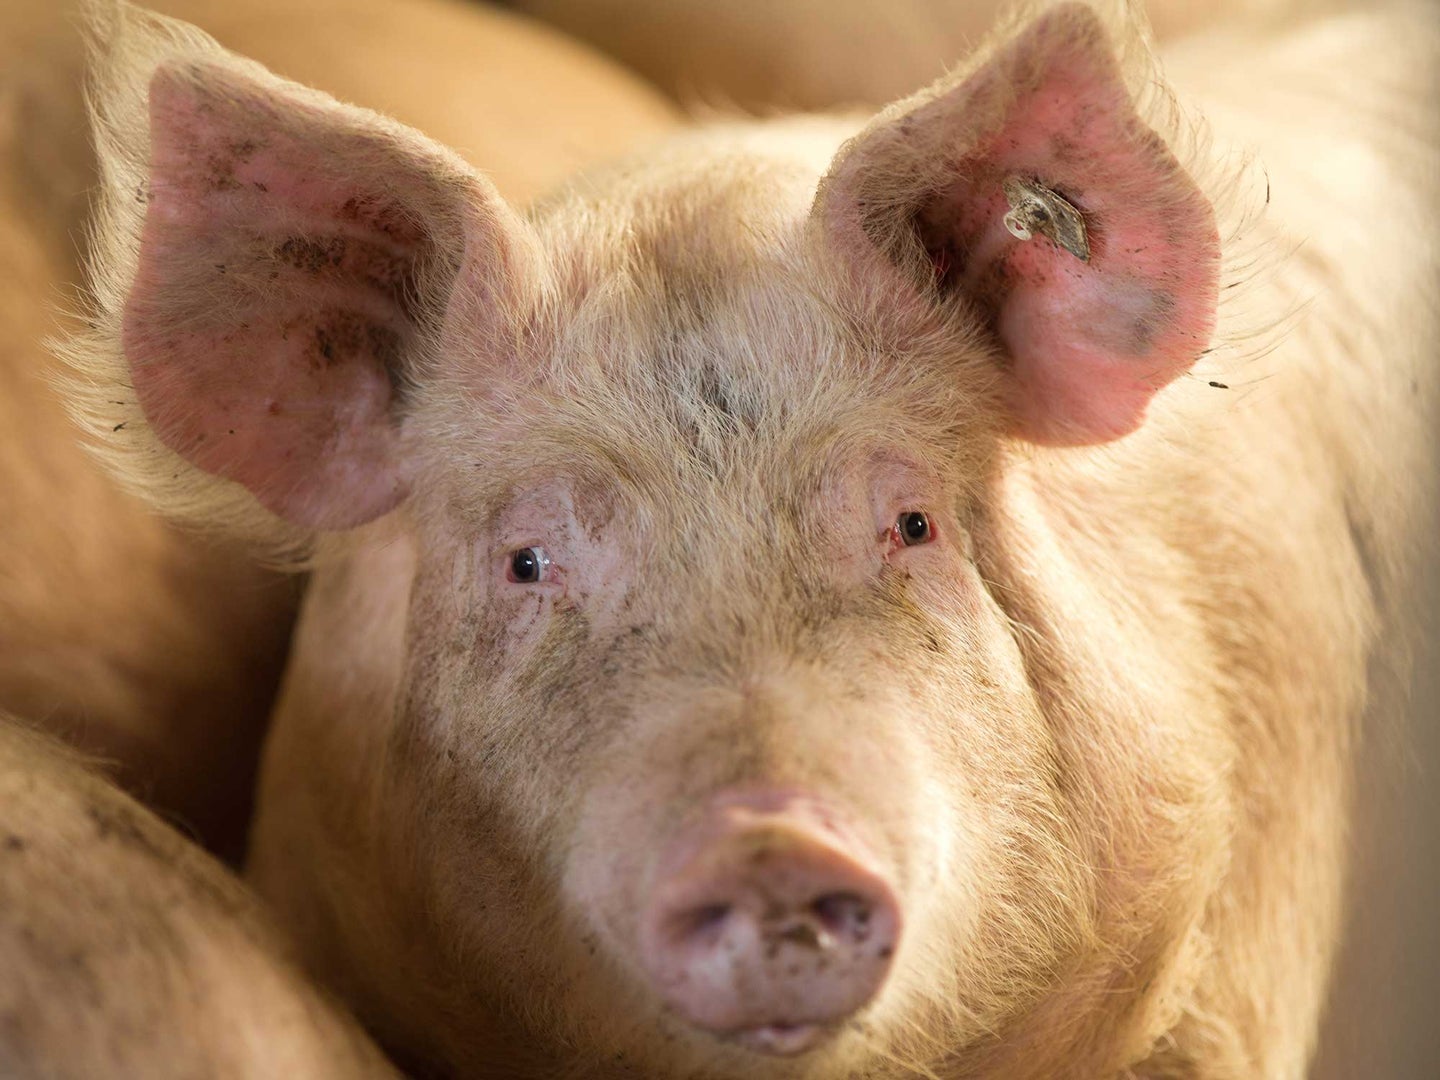 Researchers are concerned the legislature’s well-documented, long-standing relationship with the swine industry is allowing lenient policies that will further harm communities already suffering health and environmental impacts from industrial hog farming. 